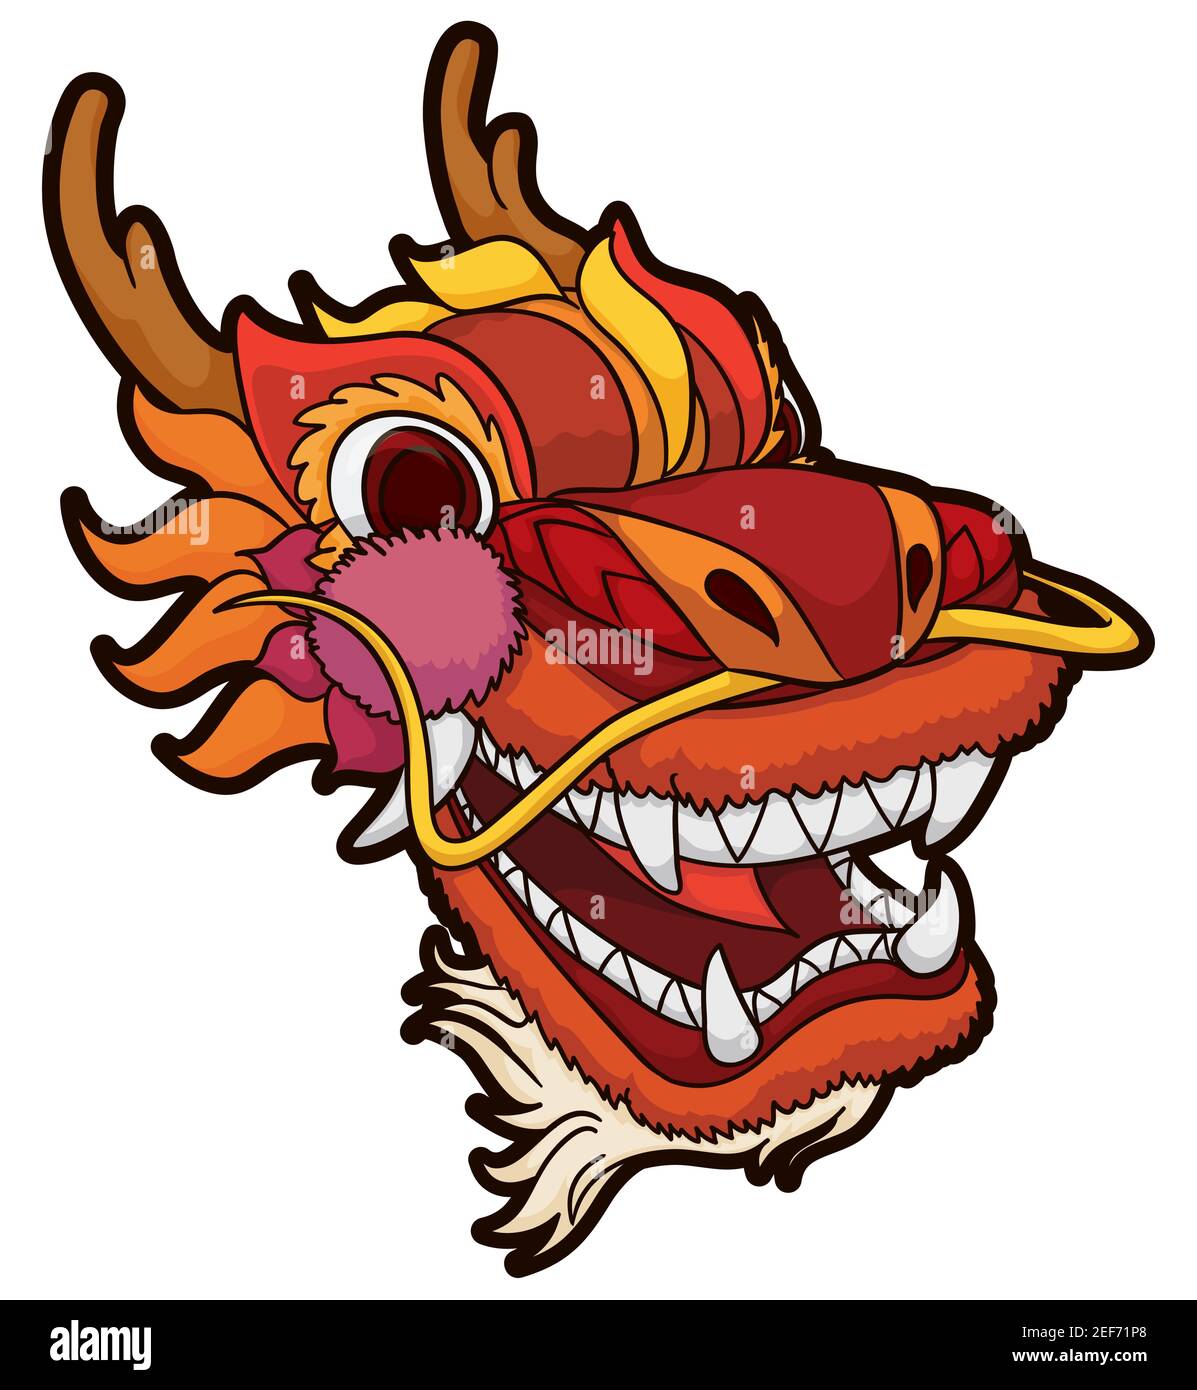 Chinese dragon head in red color, beard, horns and long whiskers with bold outline, isolated over white background. Stock Vector